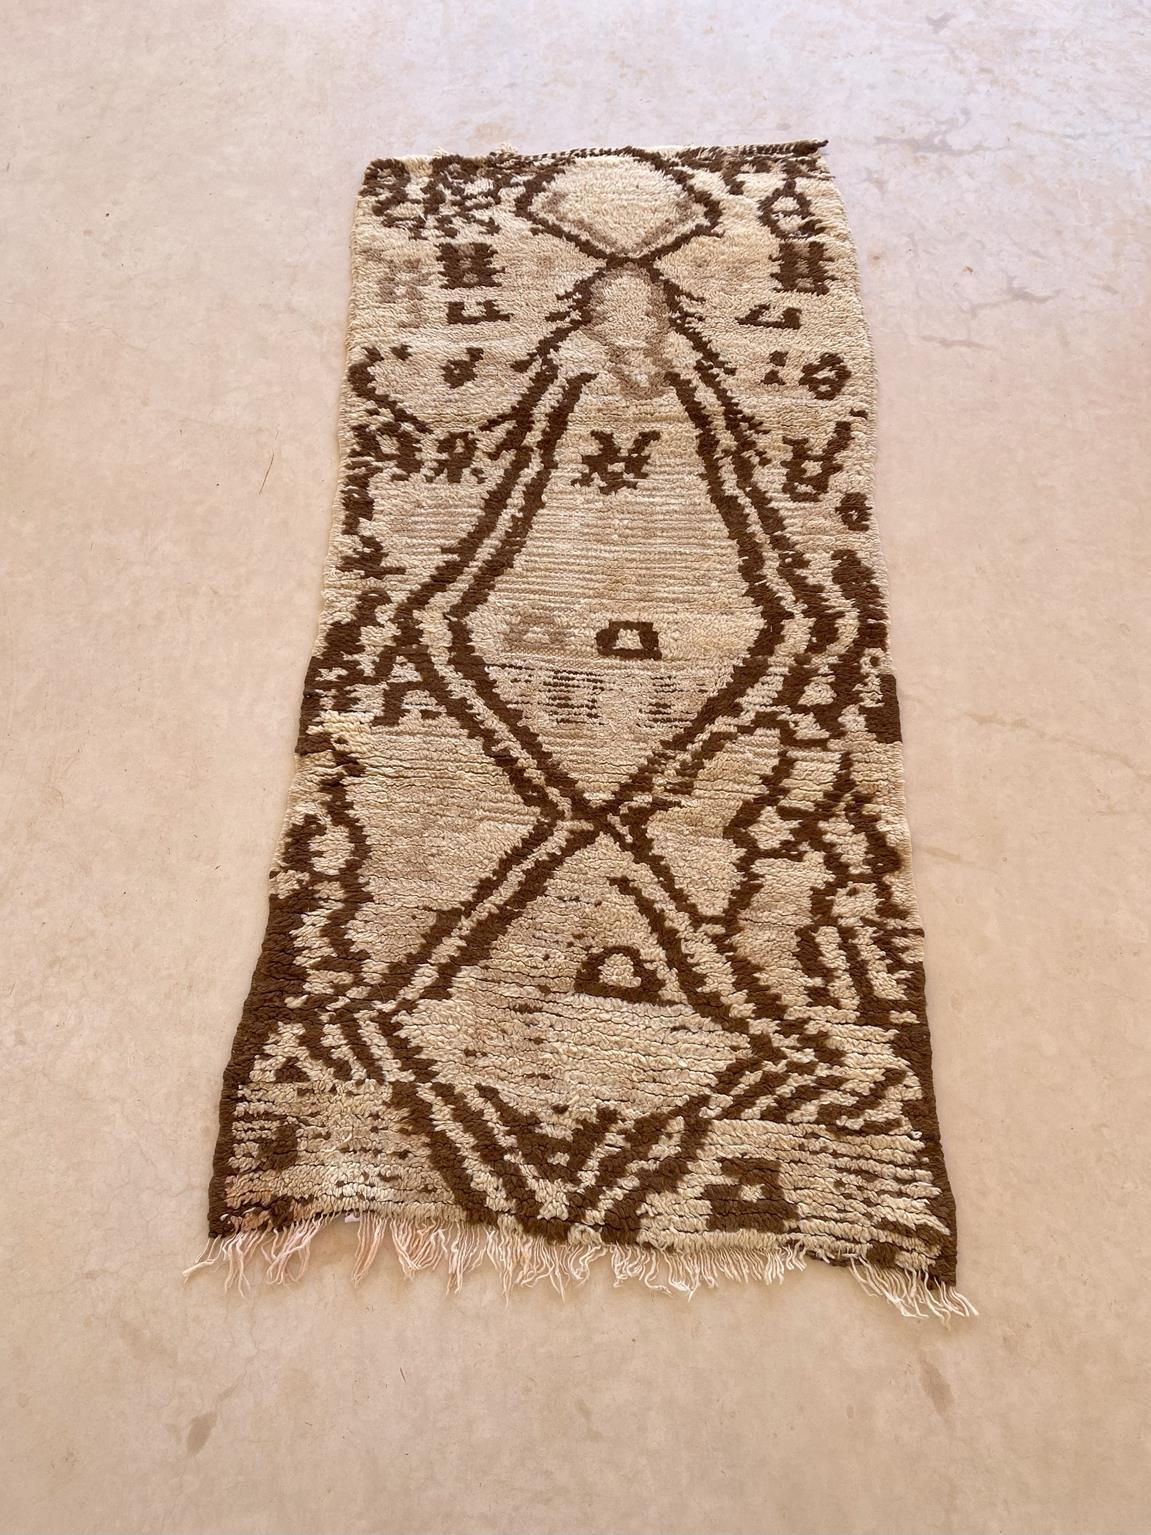 20th Century Vintage Moroccan Azilal rug - Beige/brown - 2.9x6.2feet / 88x188cm For Sale